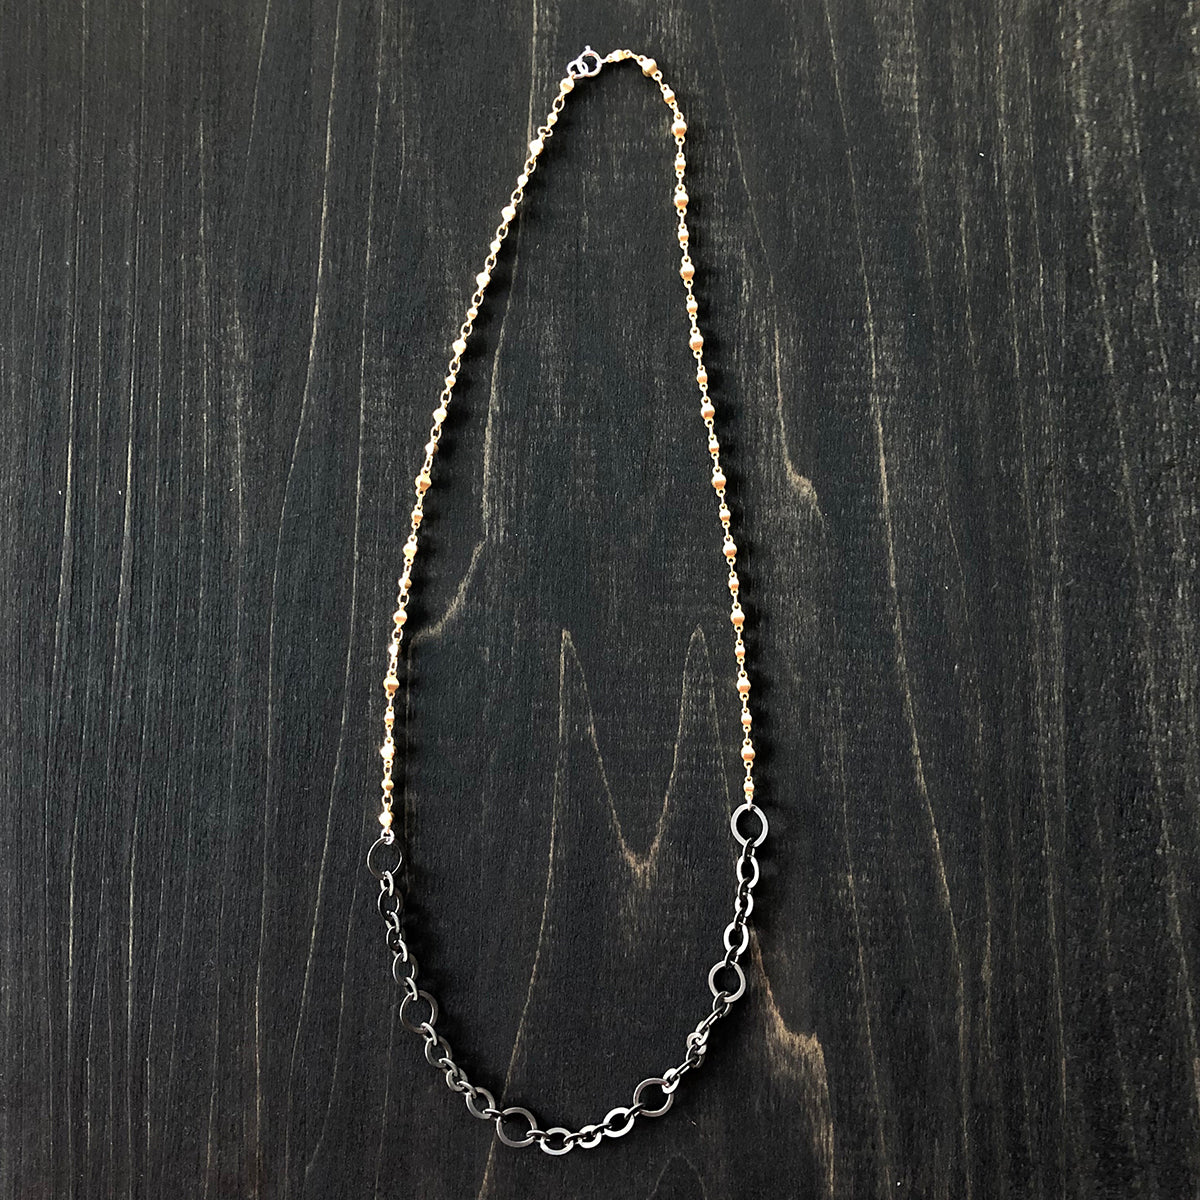 Gold Vermeil and Darkened Electroplated Chain Necklace - Jester Swink